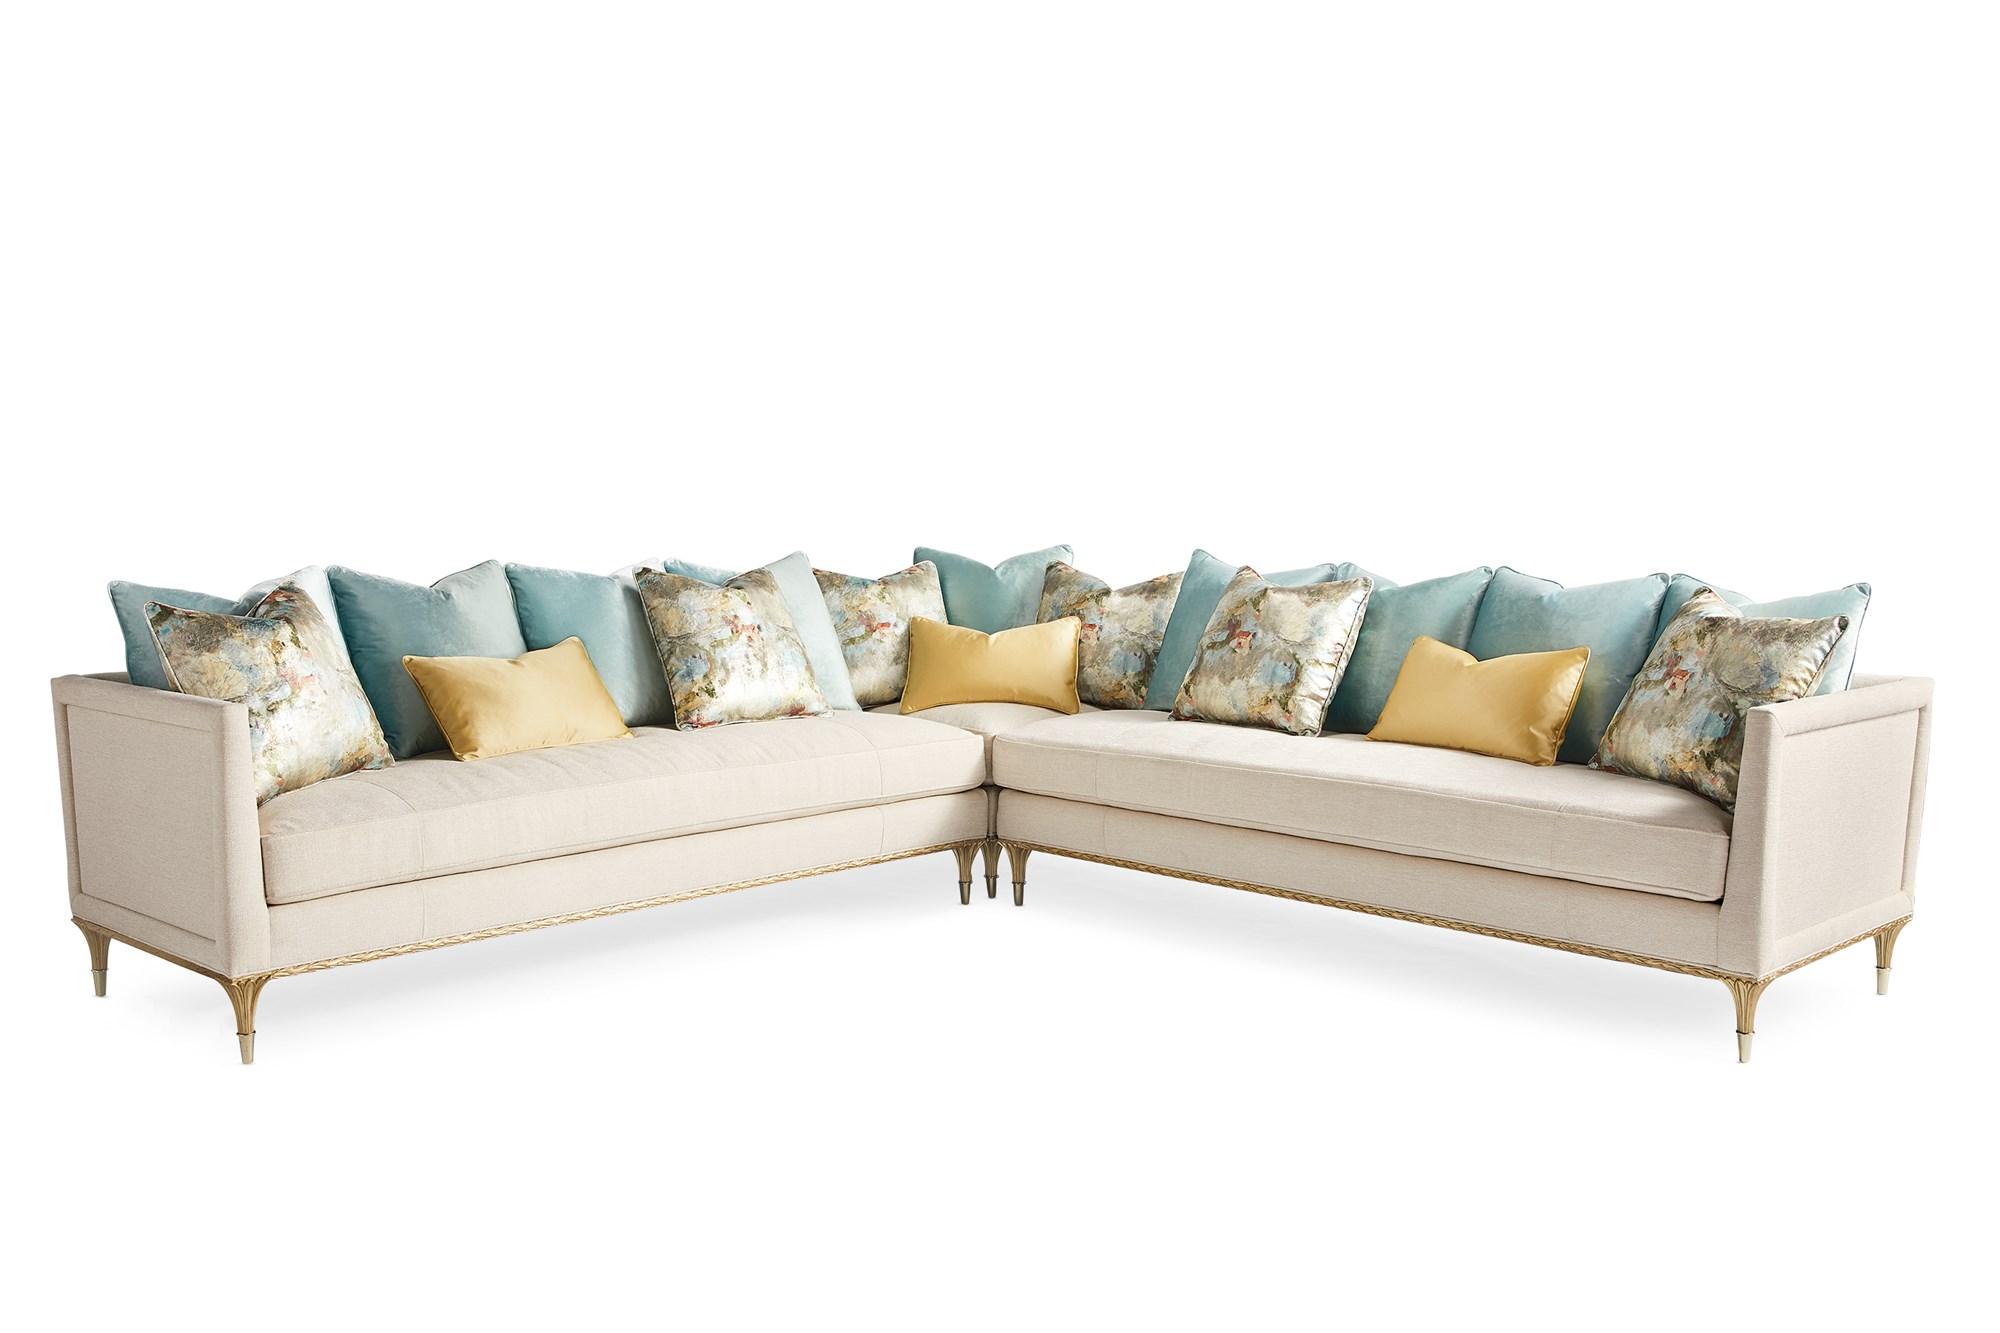 Traditional Sectional Sofa FONTAINEBLEAU FONTAINEBLEAU-SEC-3PC in Cream, Gold Fabric